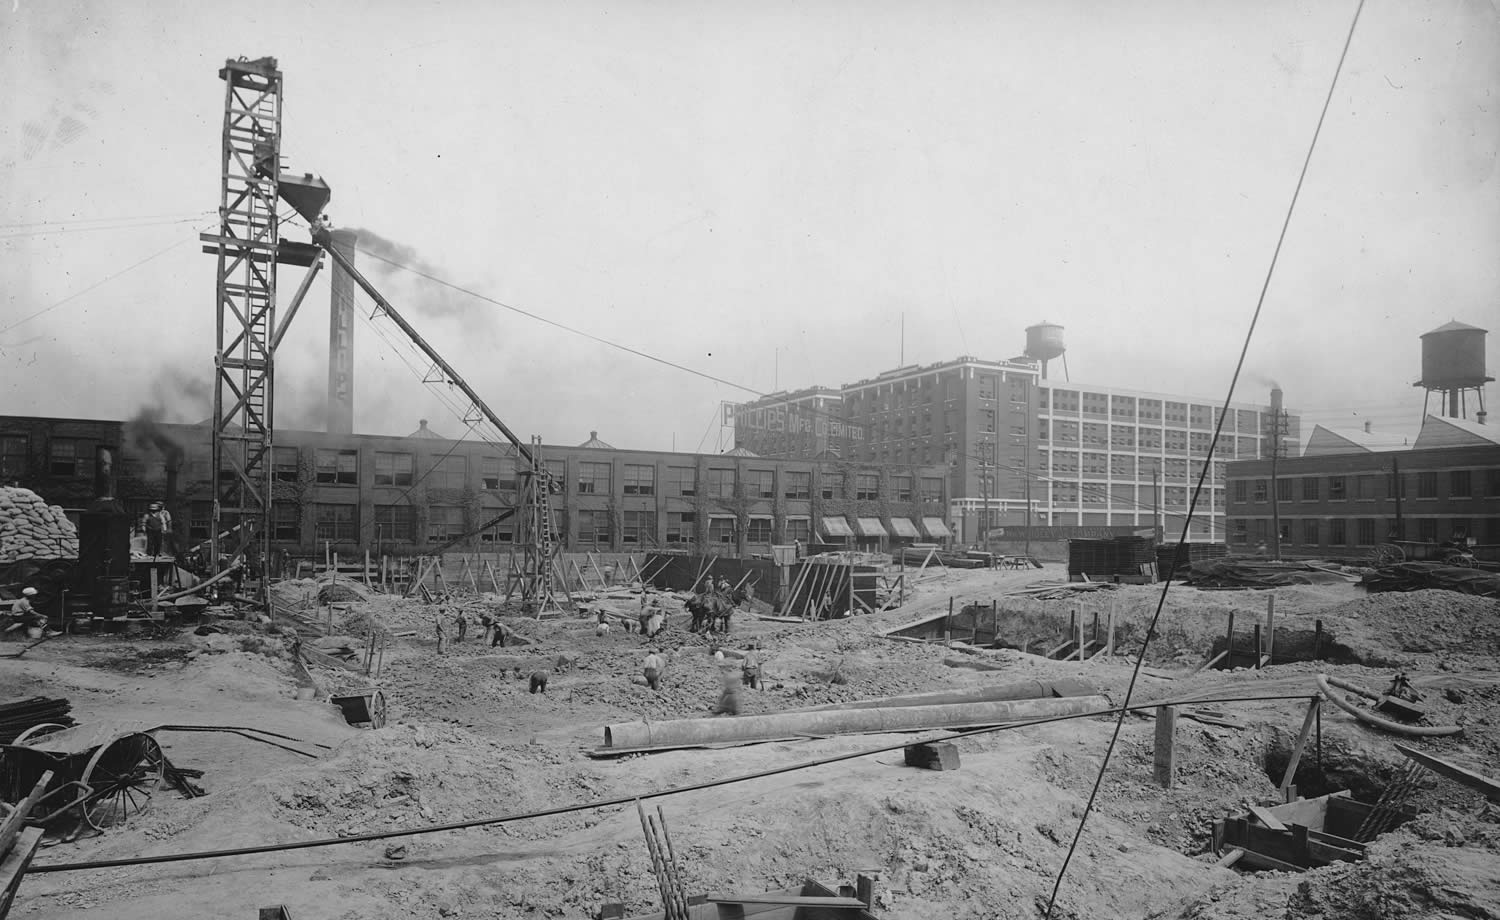 Workers with horses laying the foundation for a factory building with other completed factories in the background.